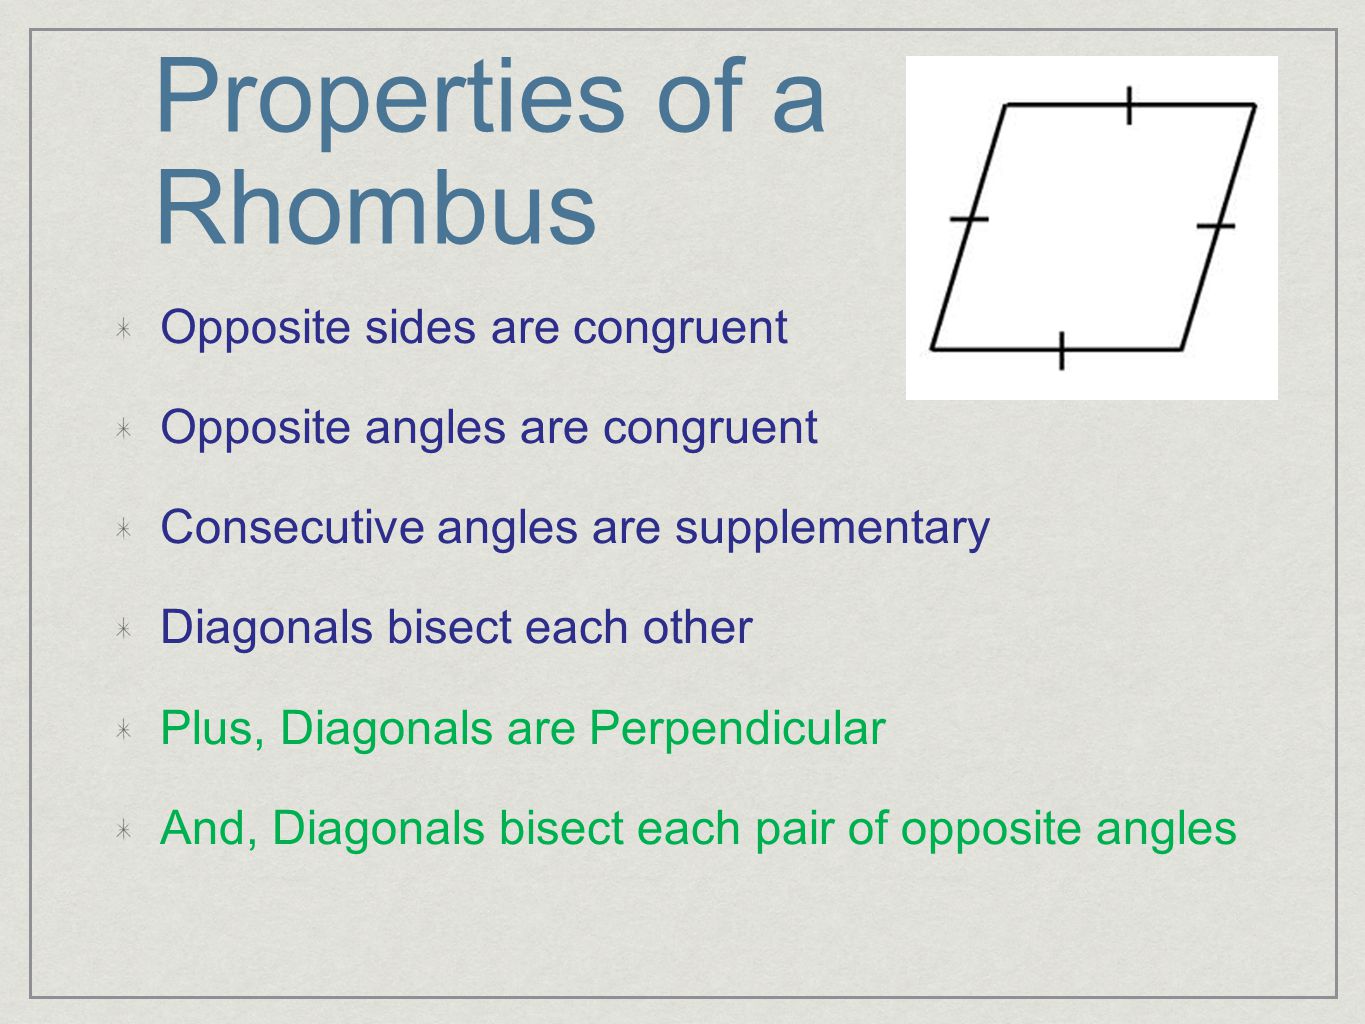 Properties of a Rhombus Opposite sides are congruent Opposite angles are congruent Consecutive angles are supplementary Diagonals bisect each other Plus, Diagonals are Perpendicular And, Diagonals bisect each pair of opposite angles